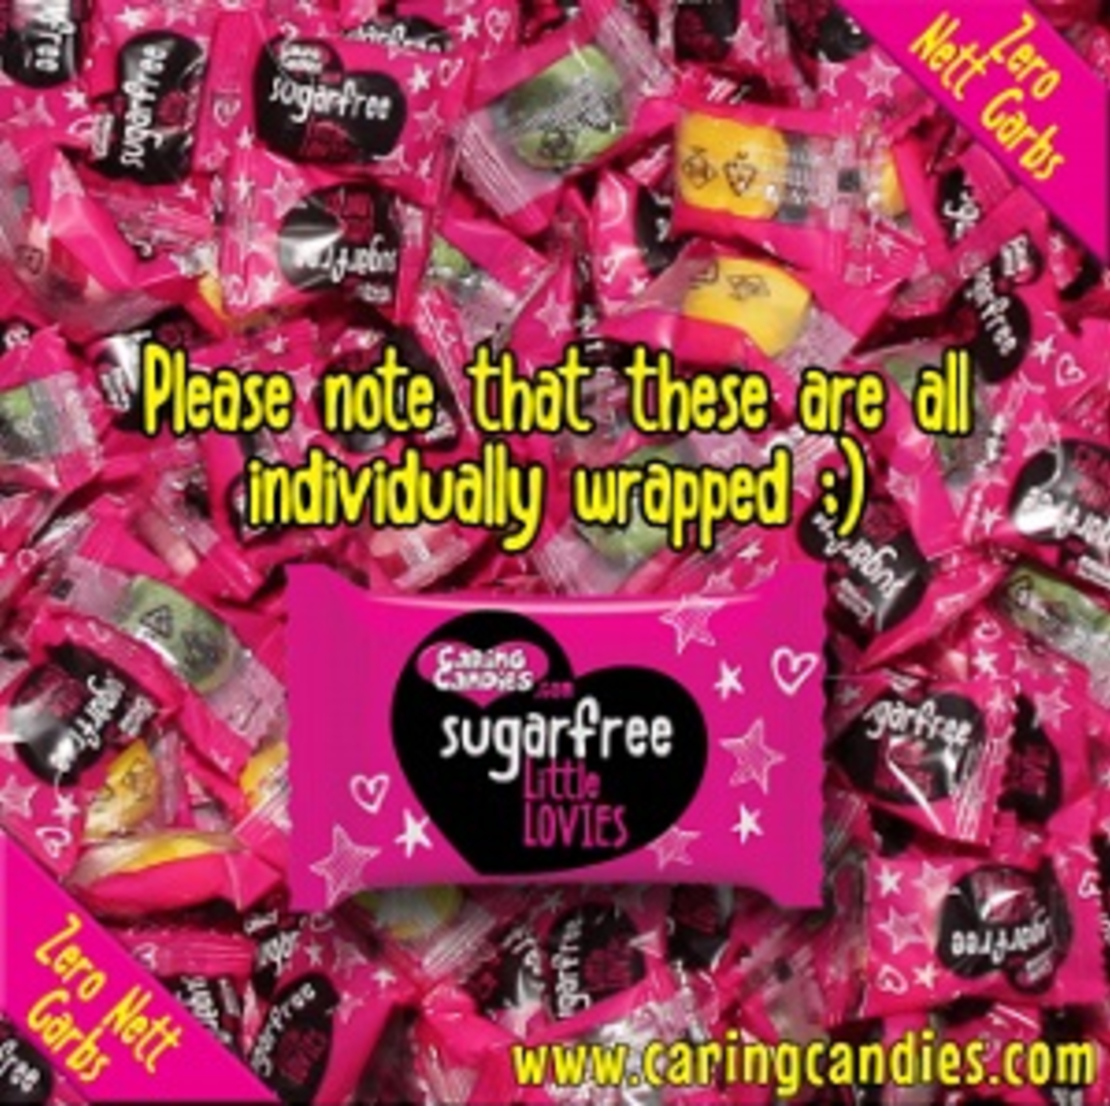 Caring Candies Little Lovies Sours 100g or 1kg